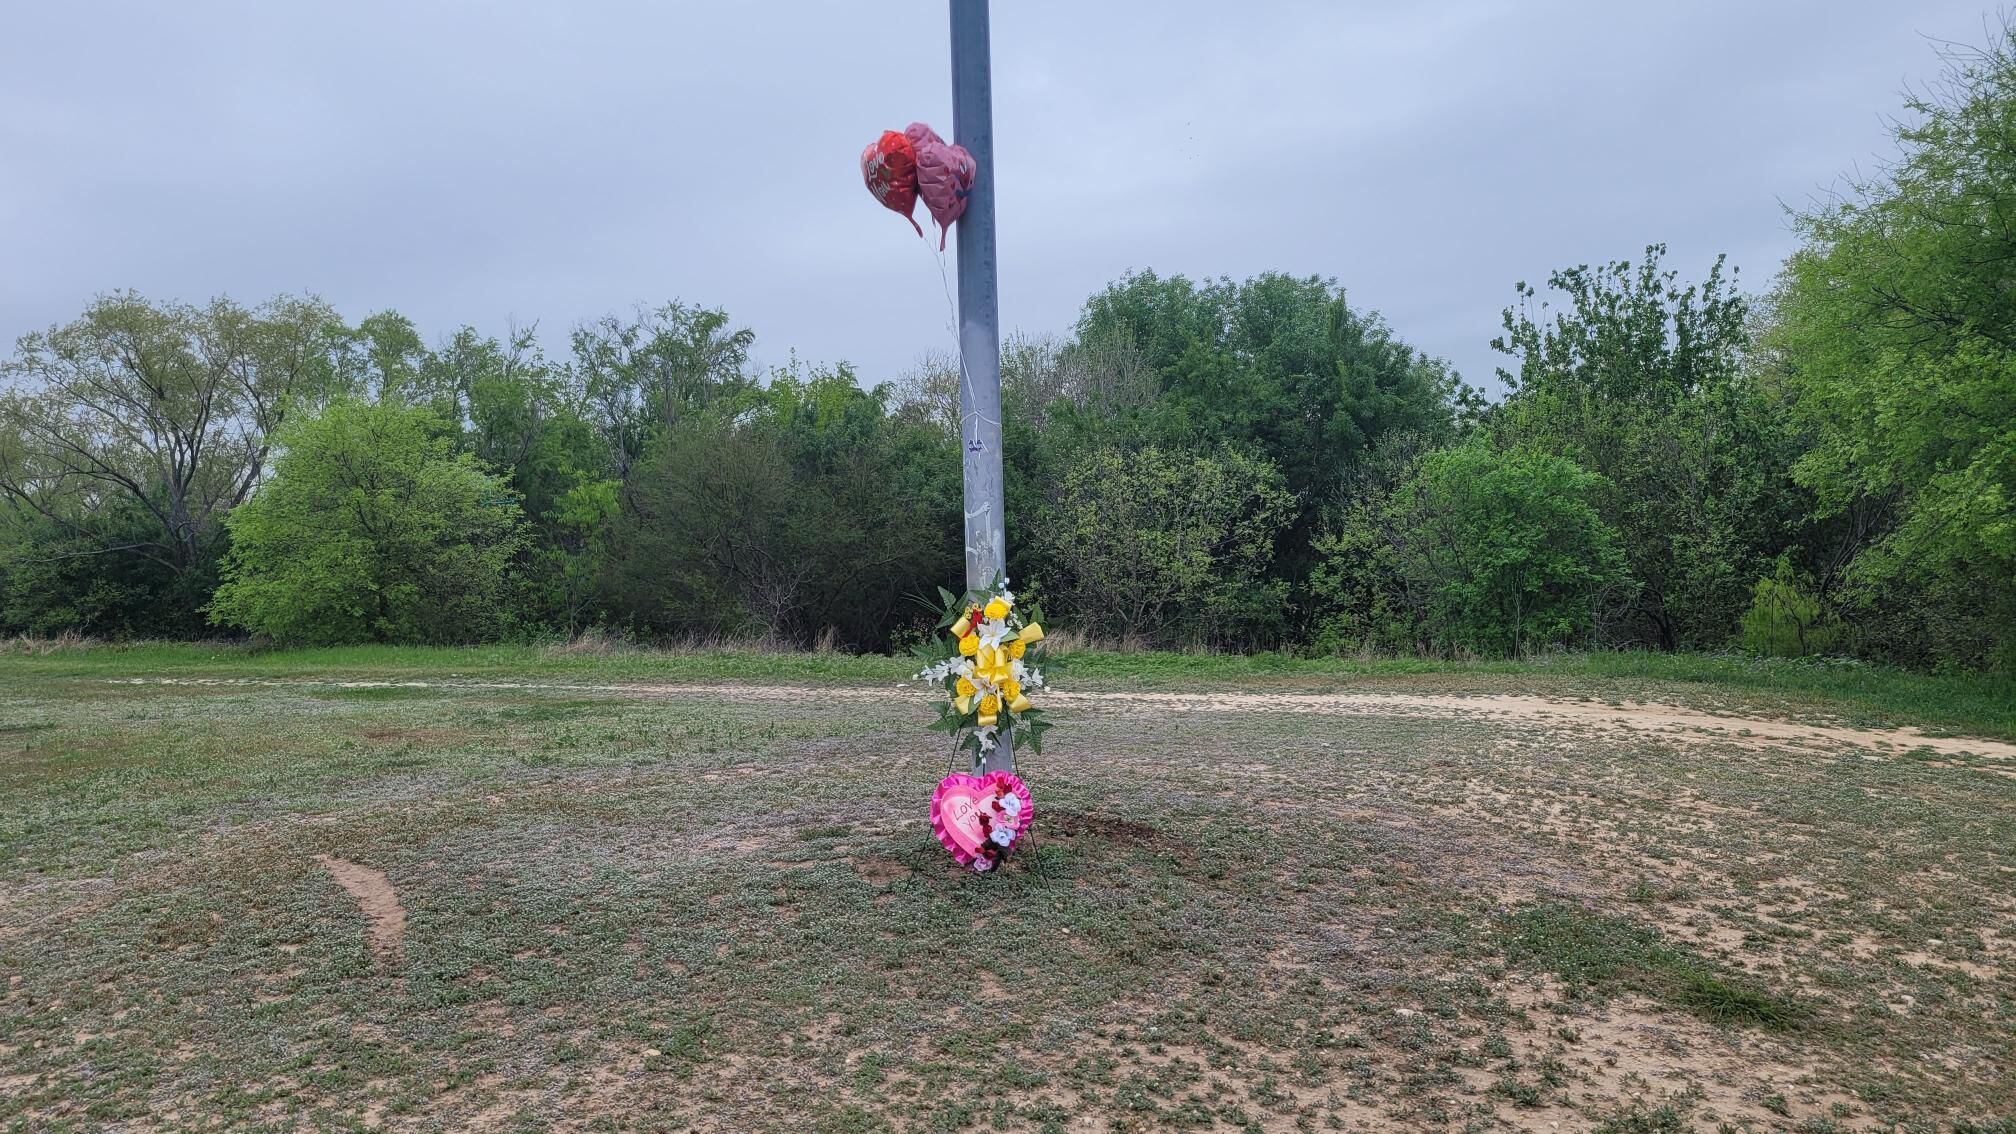 Balloons and flowers now hang from a pole near the ditch where the bodies of Savannah Kriger, 32, and her three-year-old son, Kaiden, were found Tuesday morning.